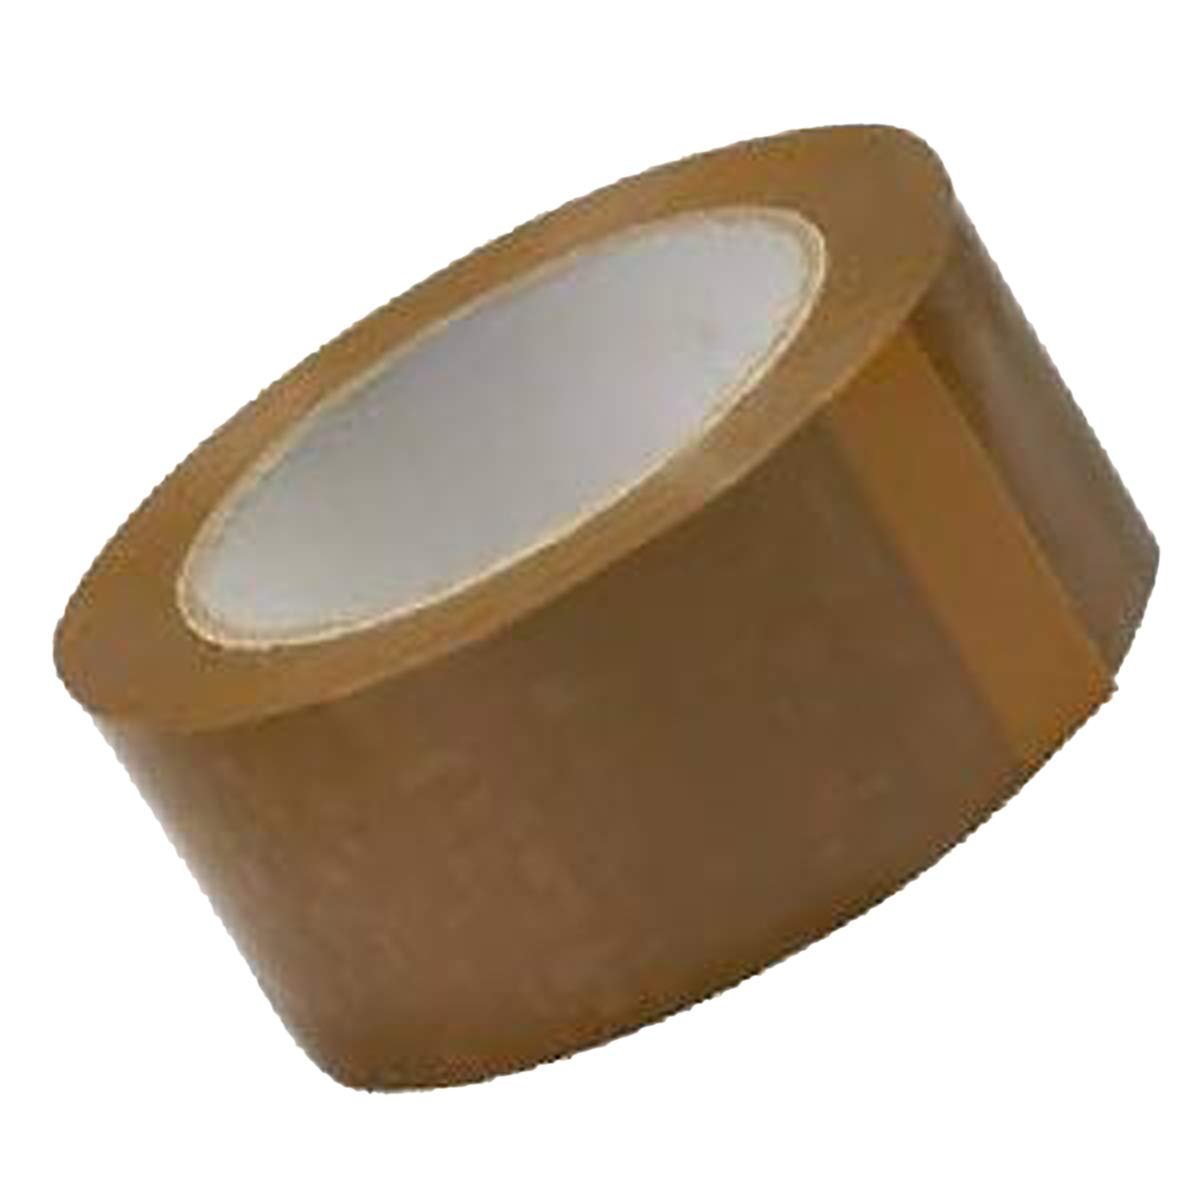 Brown Tape 3 inch/Packing Tape/Heavy Duty Brown Packaging Tape-65 mtr-2 Pack